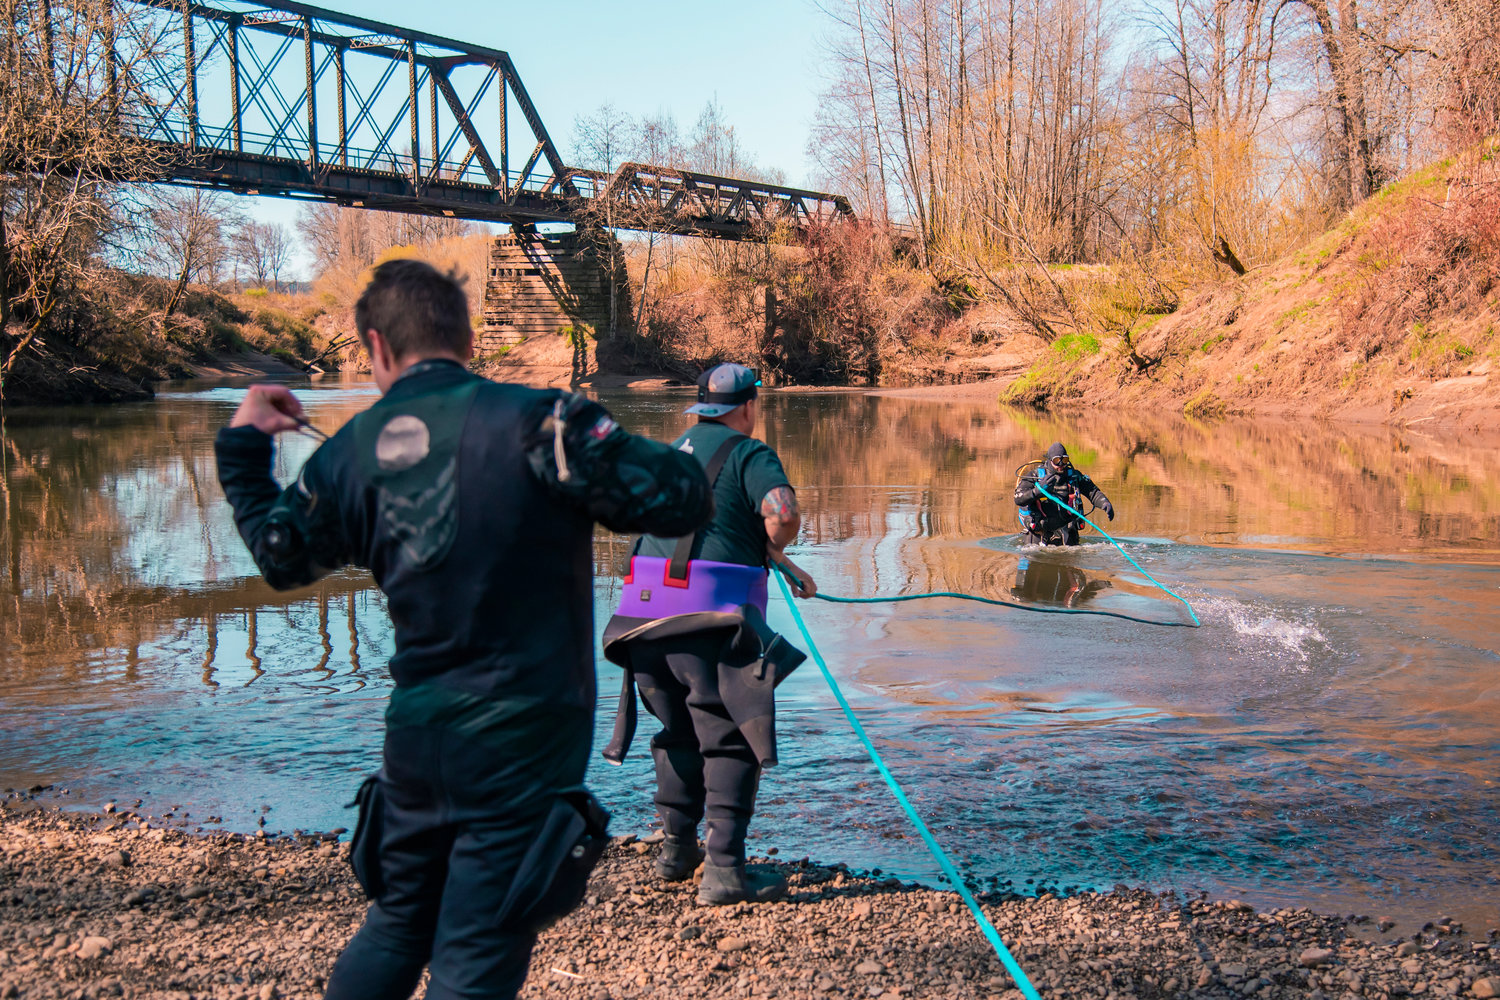 Independent volunteer divers Corey Cooper, Jefferson Greenwell, and Jim Baker use a rope during a search for missing teen Zach Hines-Rager in the Chehalis River near Adna.